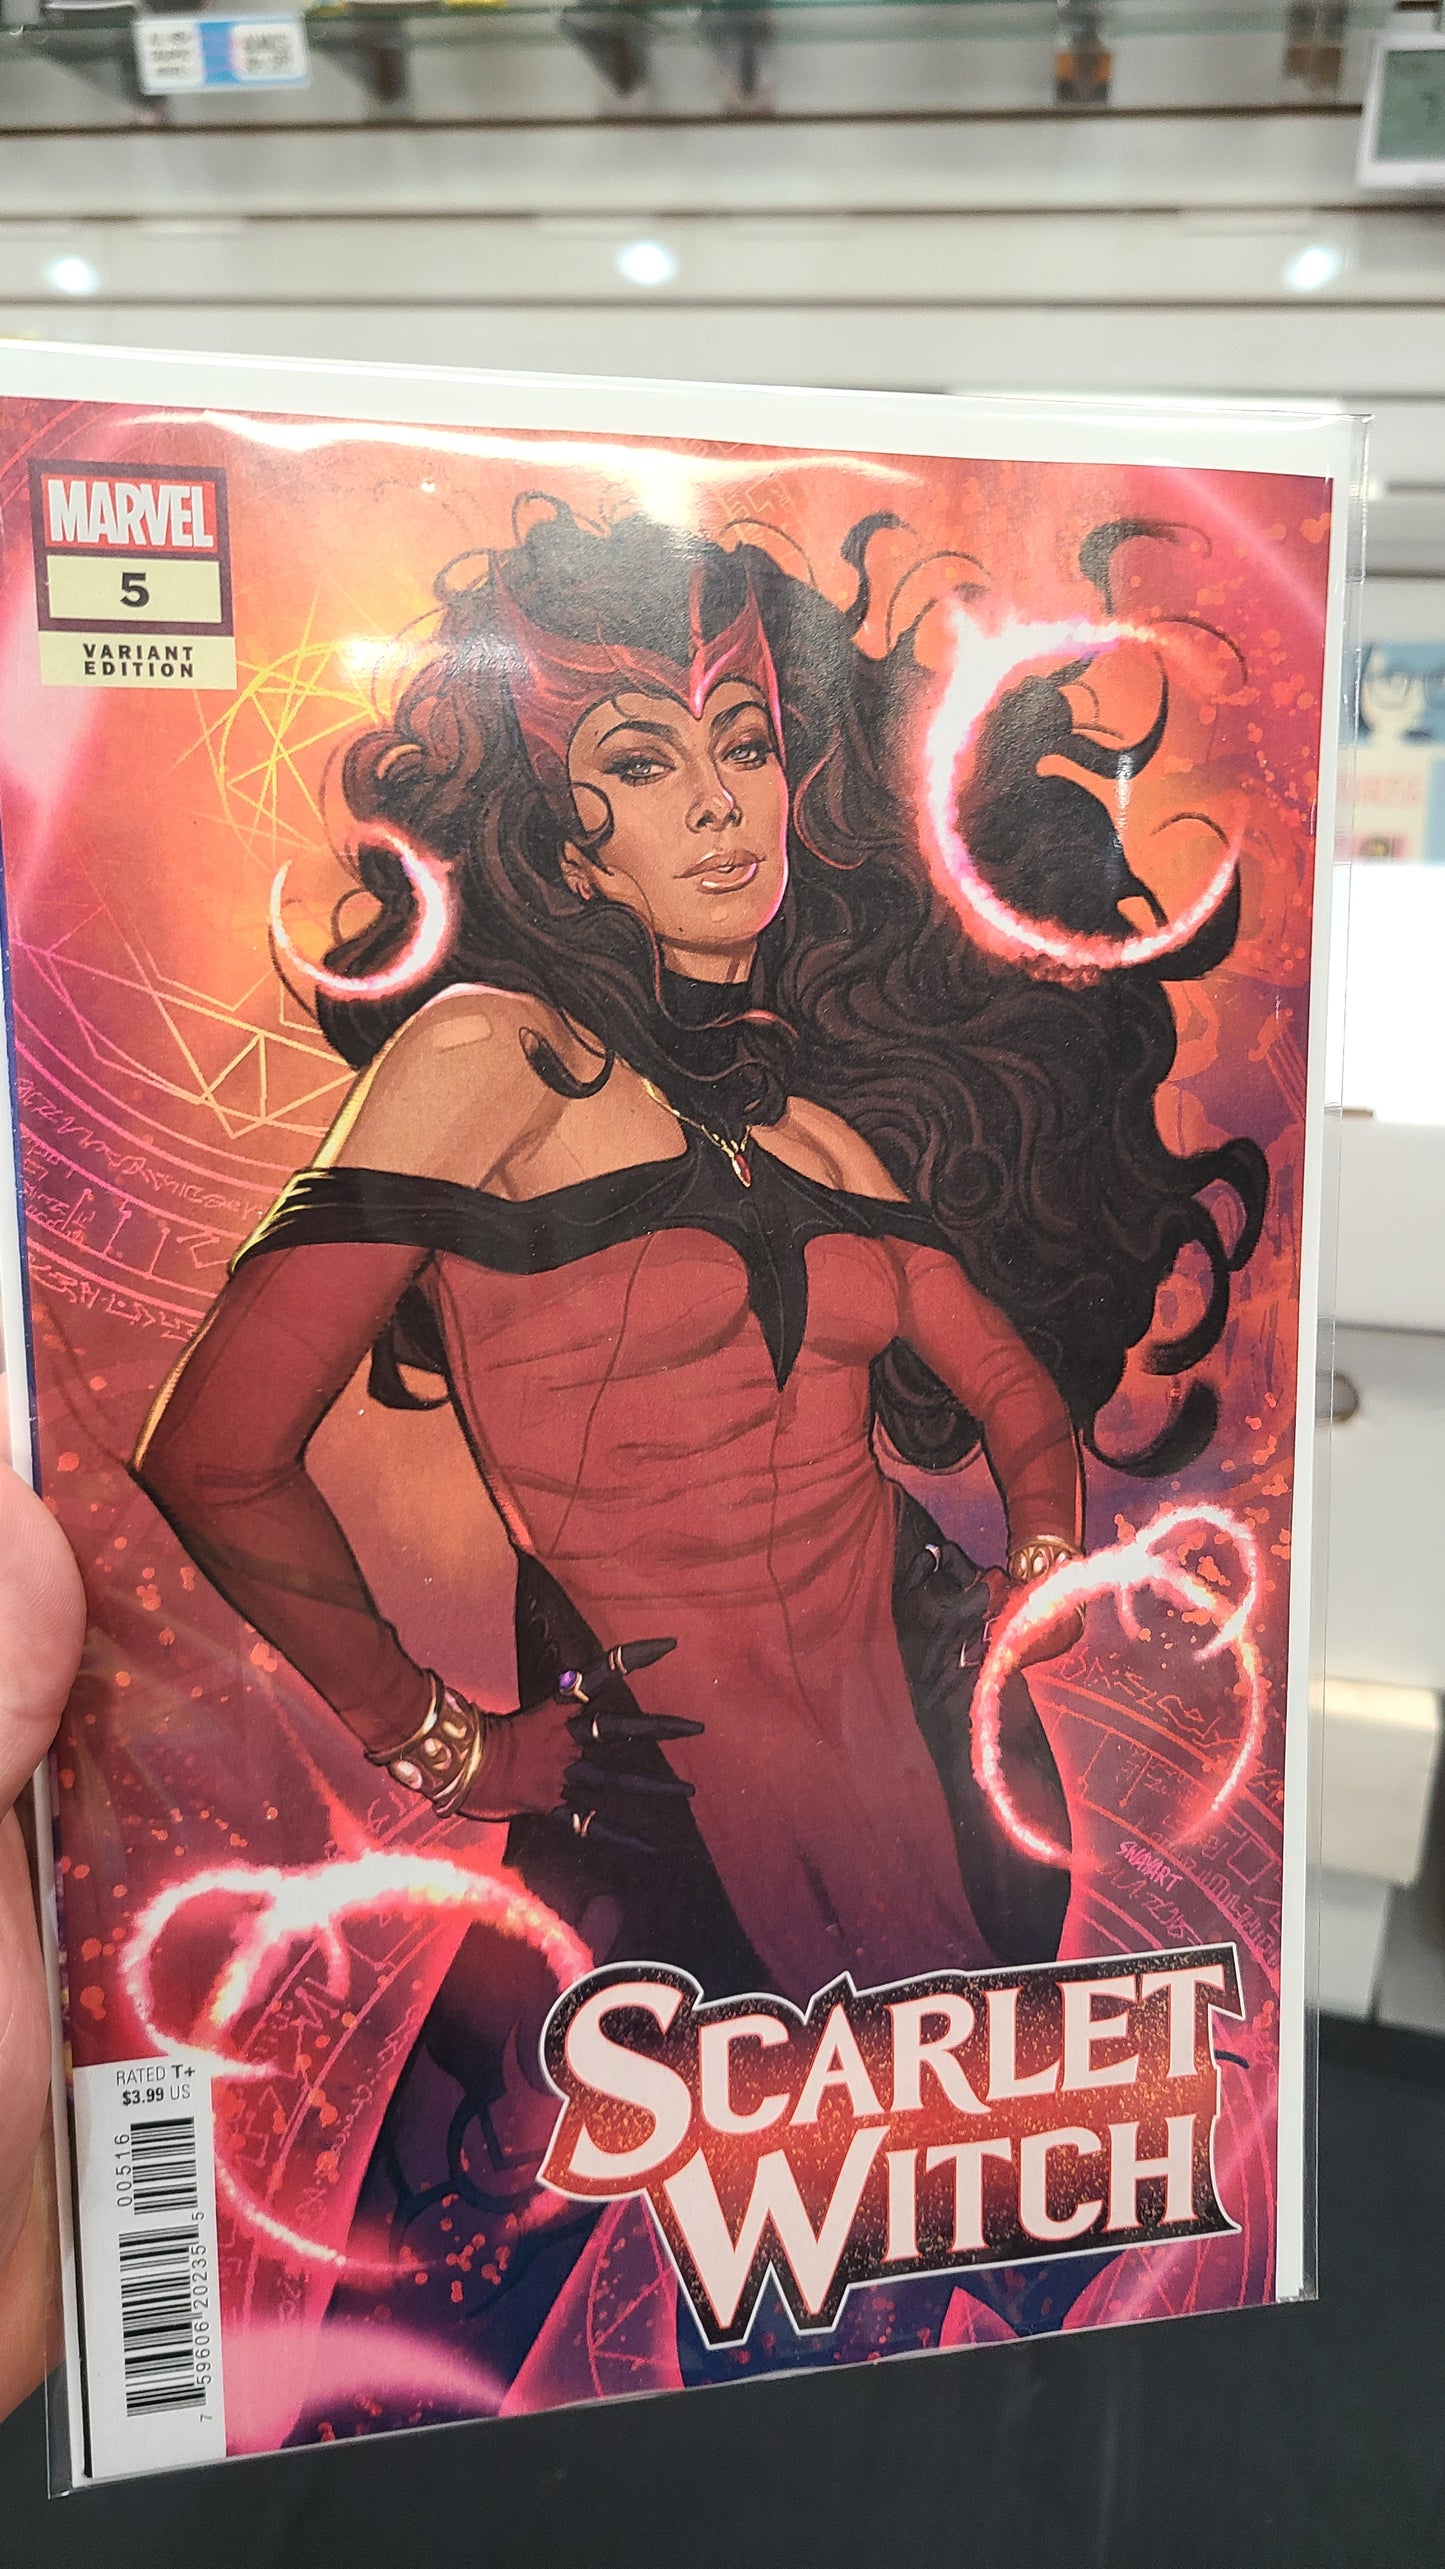 SCARLET WITCH #5 1:25 BY JOSHUA "SWAY" SWABY